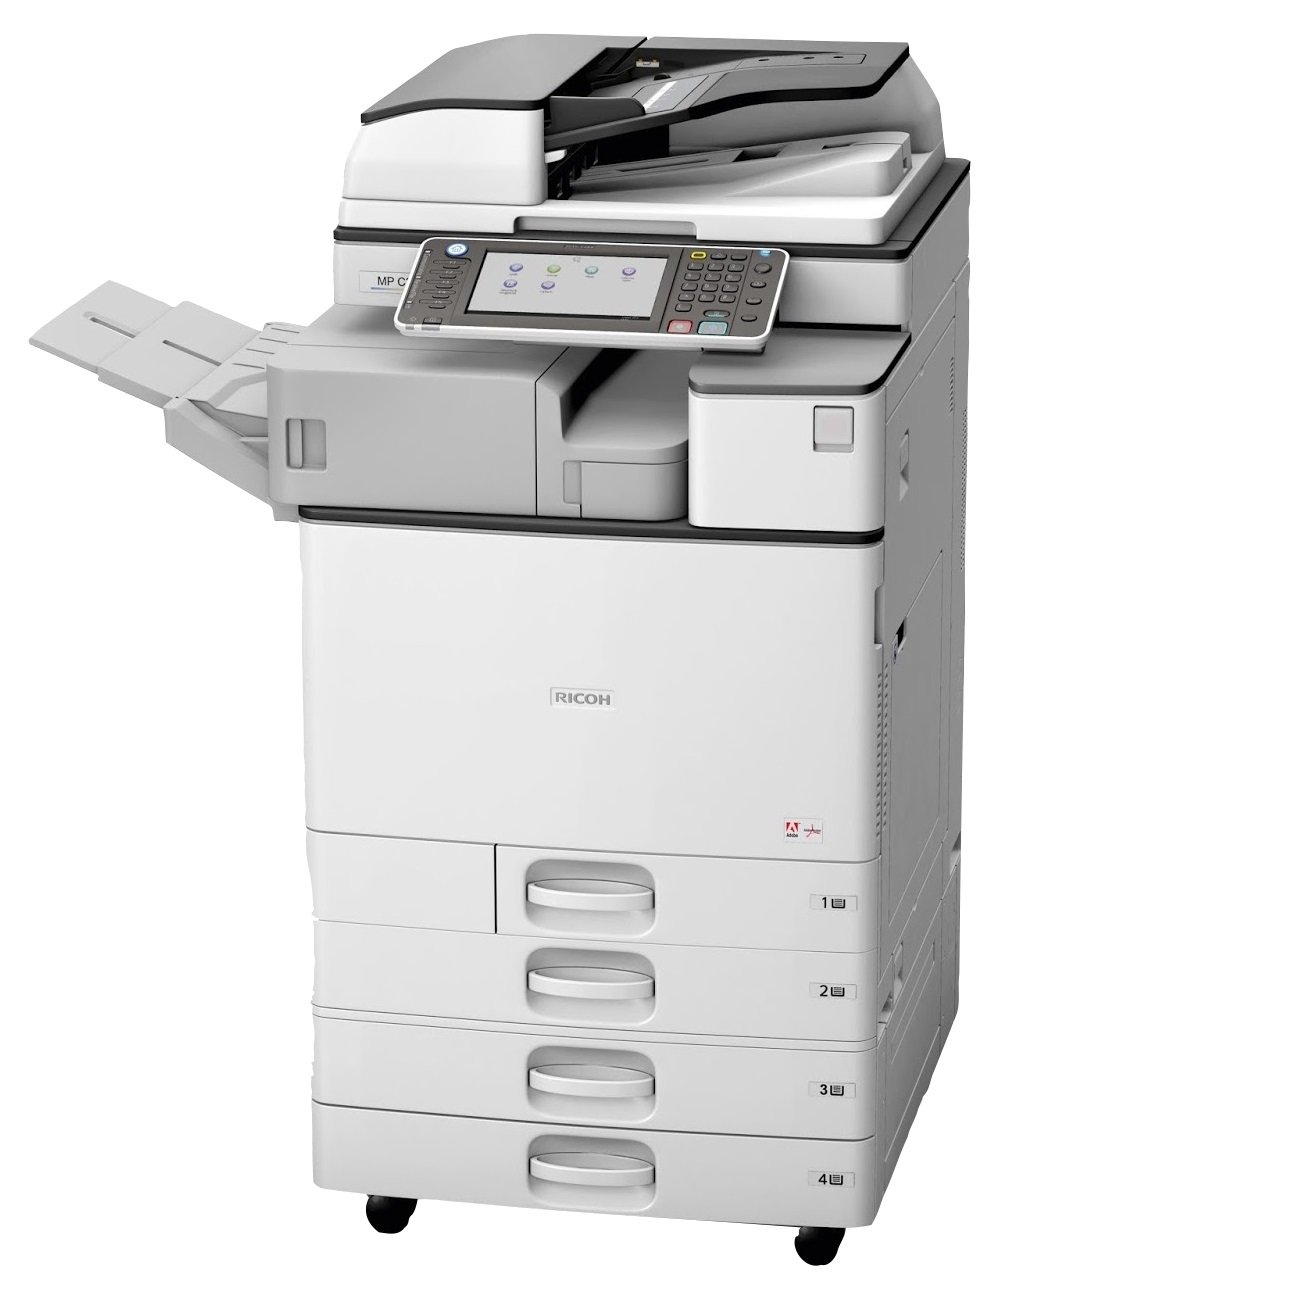 Absolute Toner Ricoh MP C2003 Color Multifunction Laser Printer Copier Scanner (11x17, 12x18) For Office - $34.99/Month Office Copiers In Warehouse